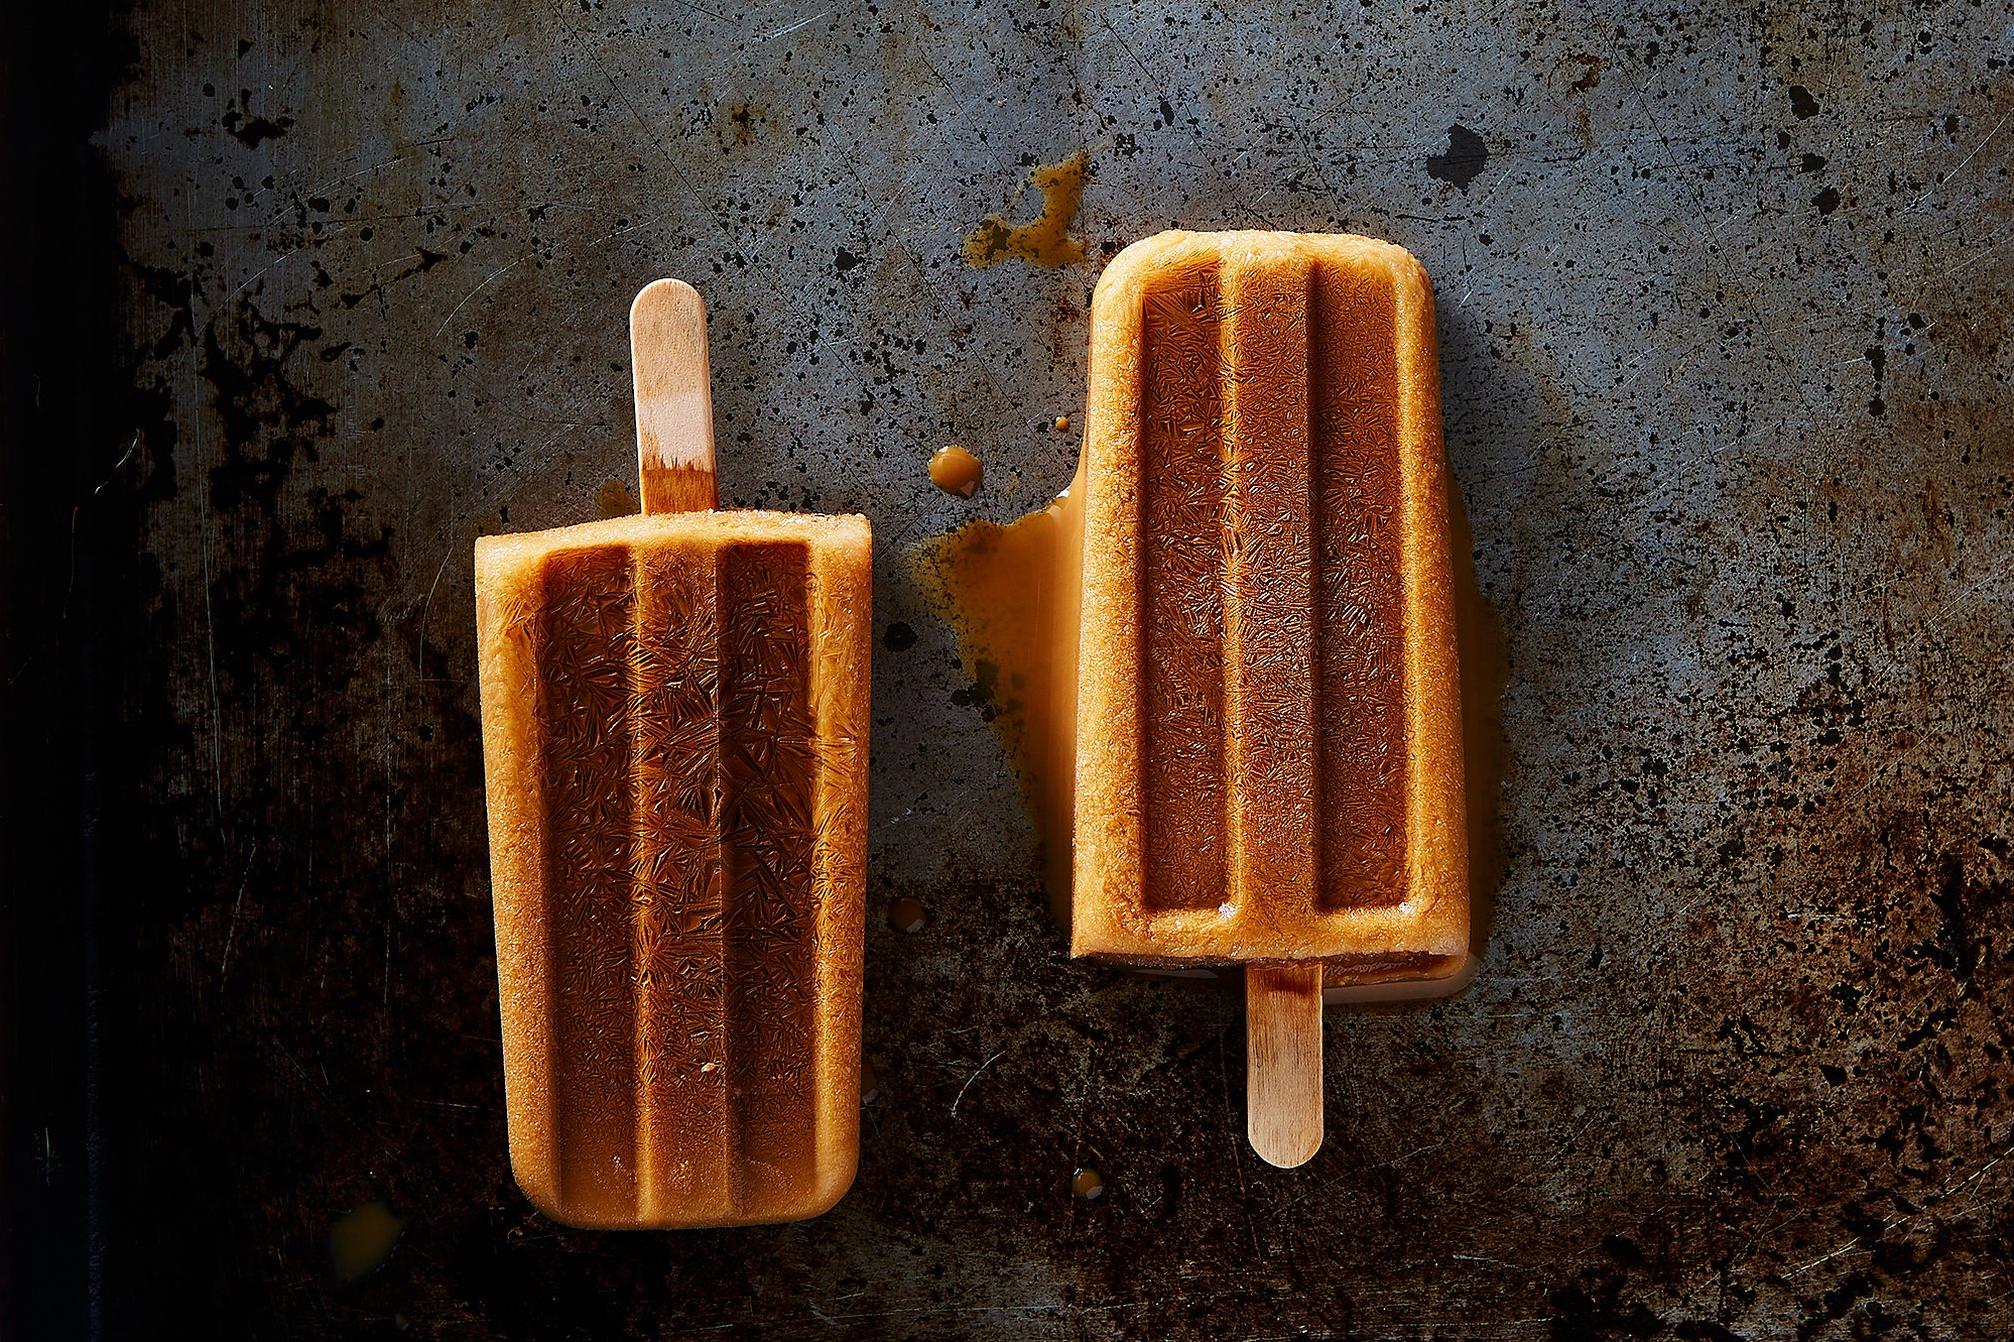  These caffeine-infused popsicles will jolt you into a good mood!